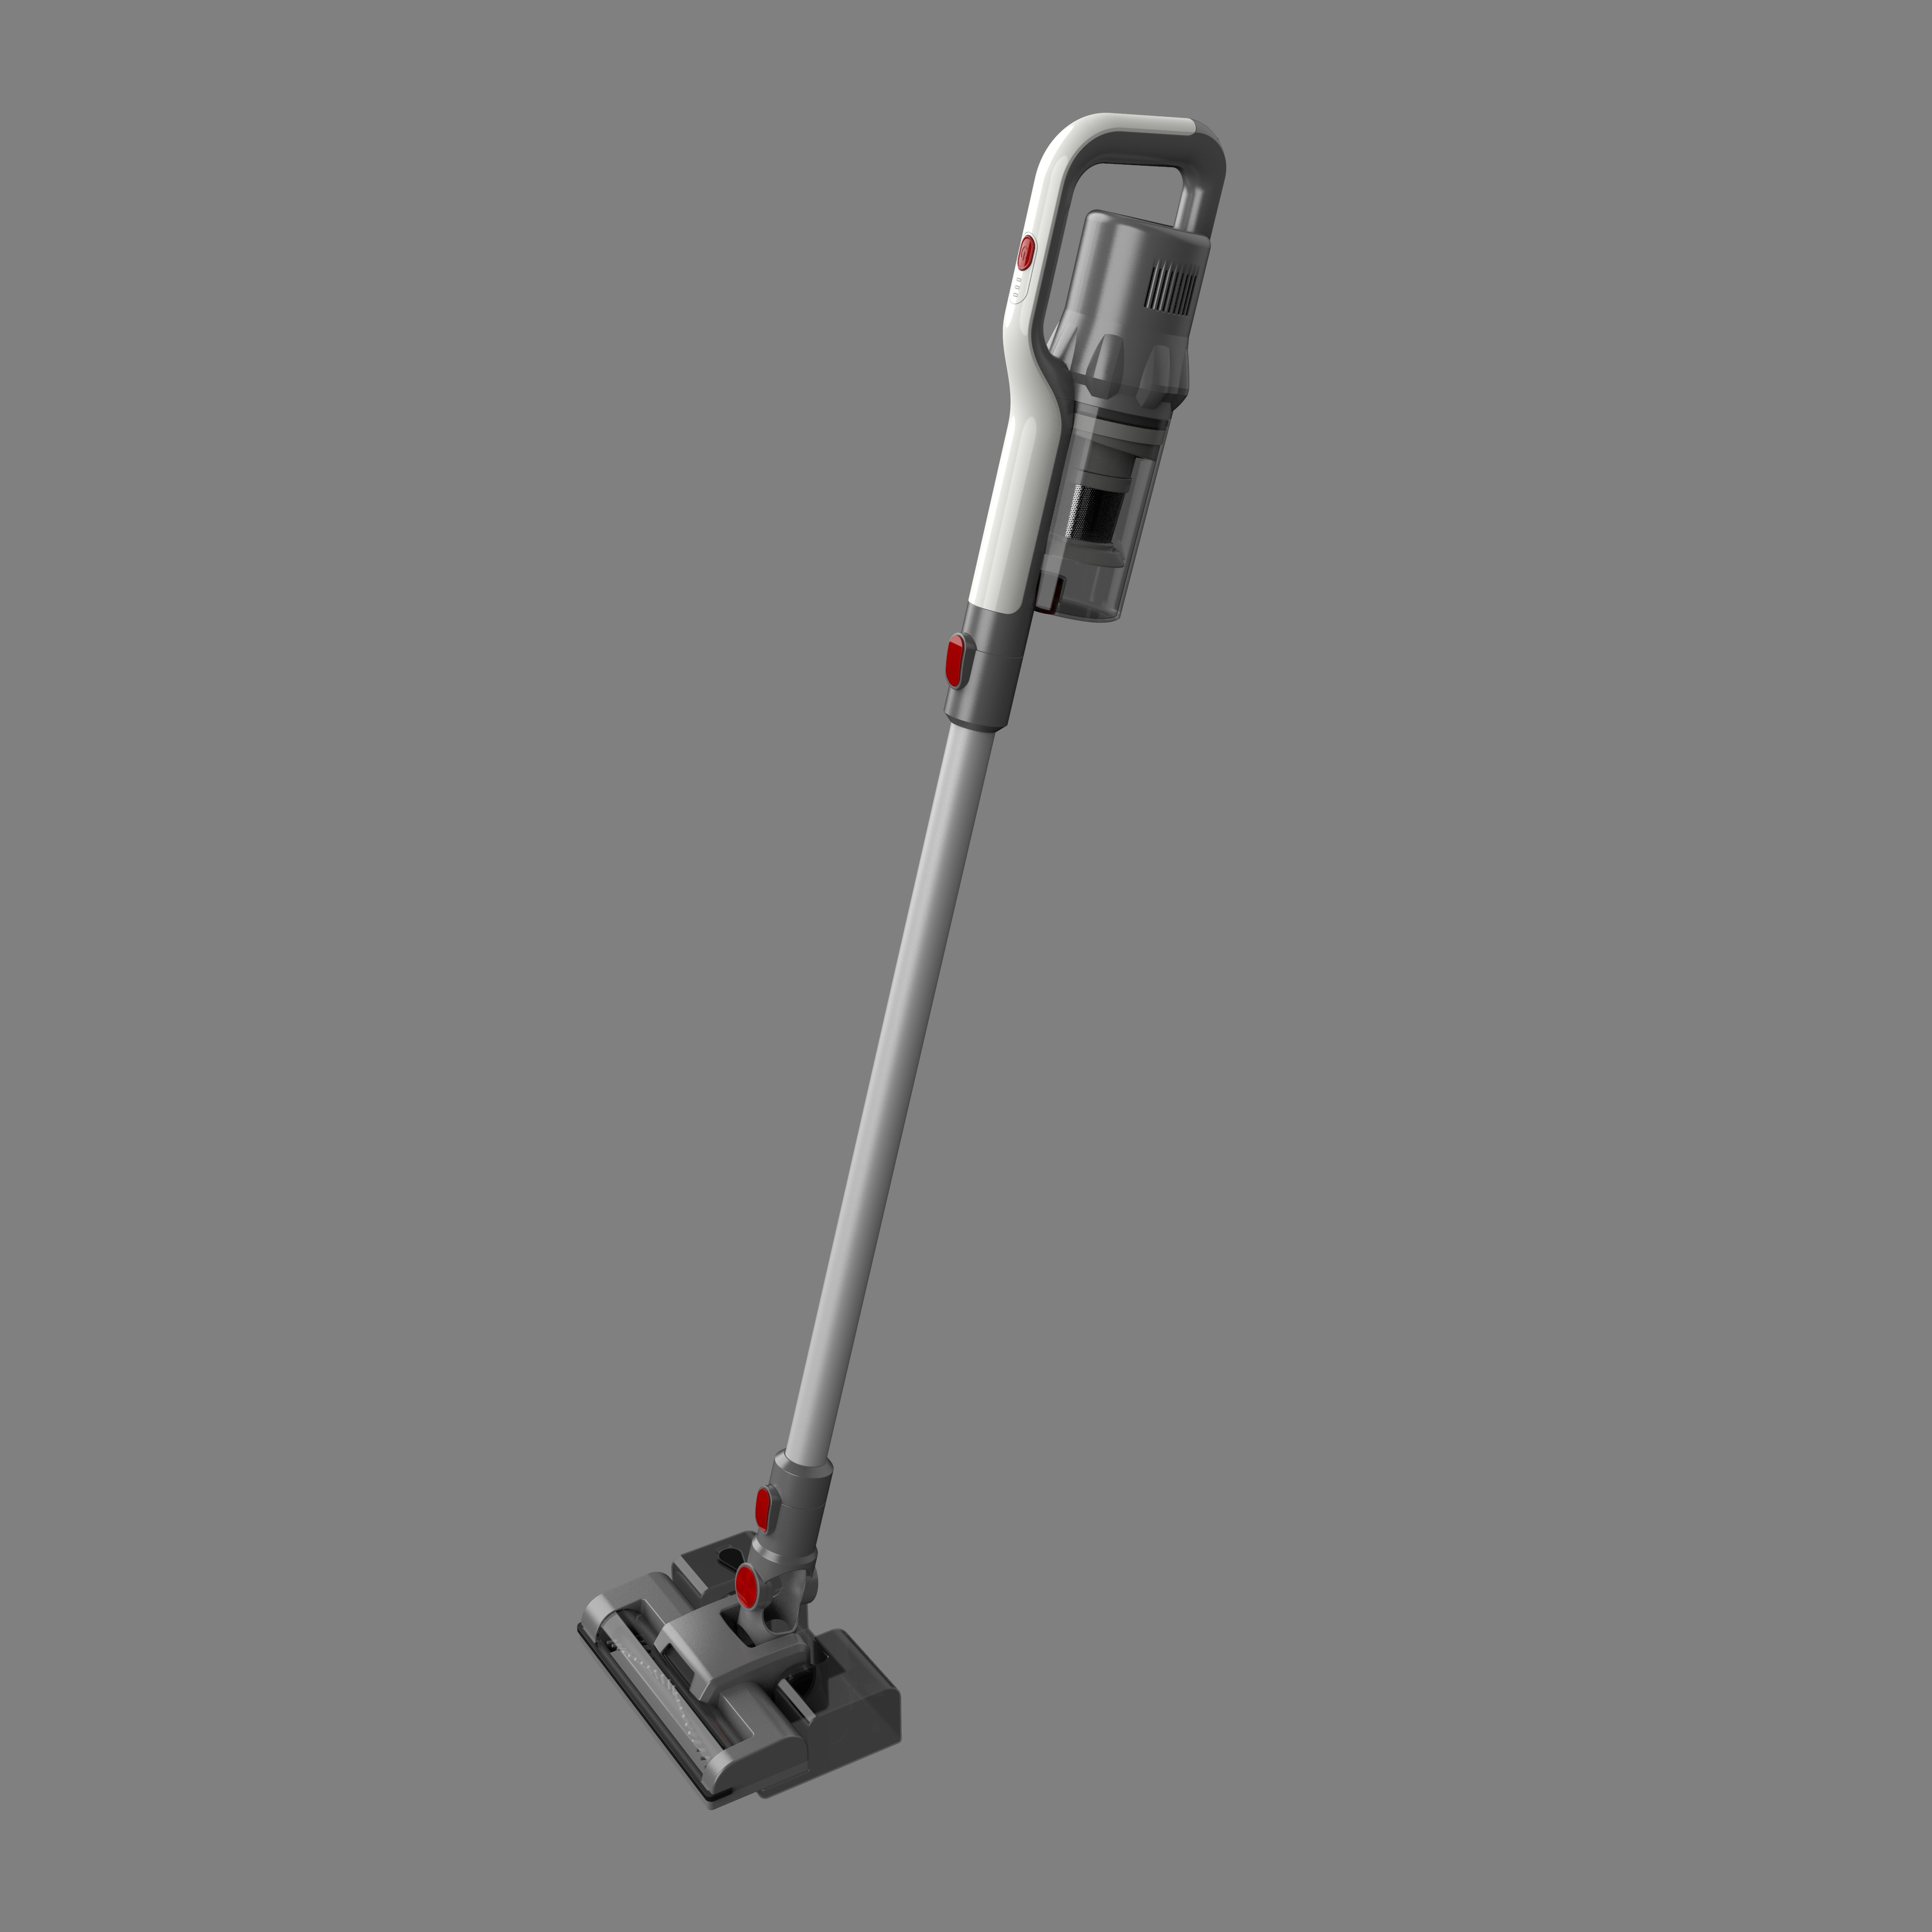 What Are The Considerations When Choosing A Vertical Vacuum Cleaner?